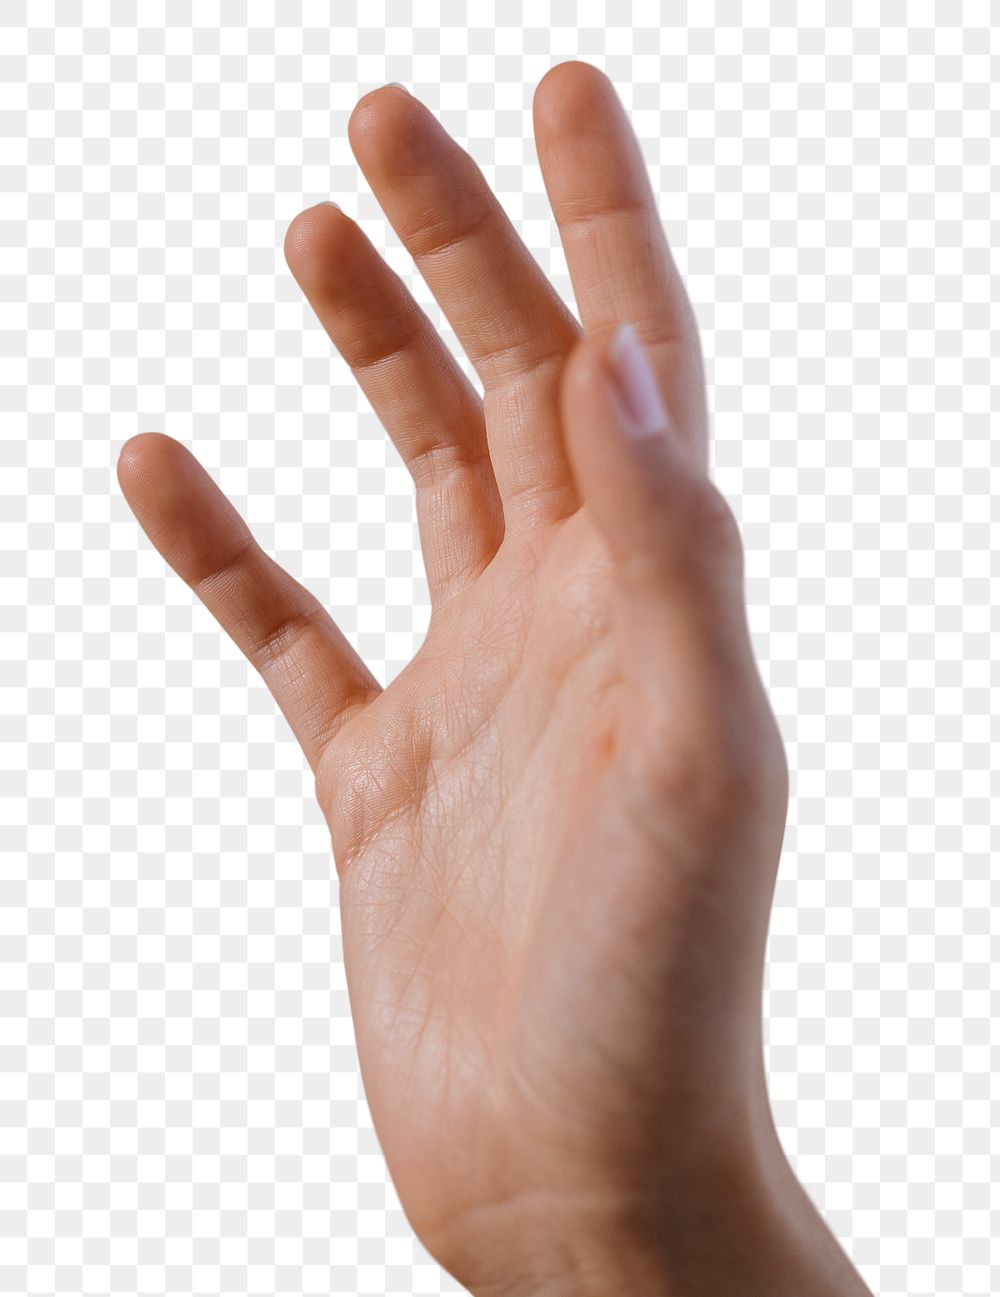 Hand raising up in the air transparent png